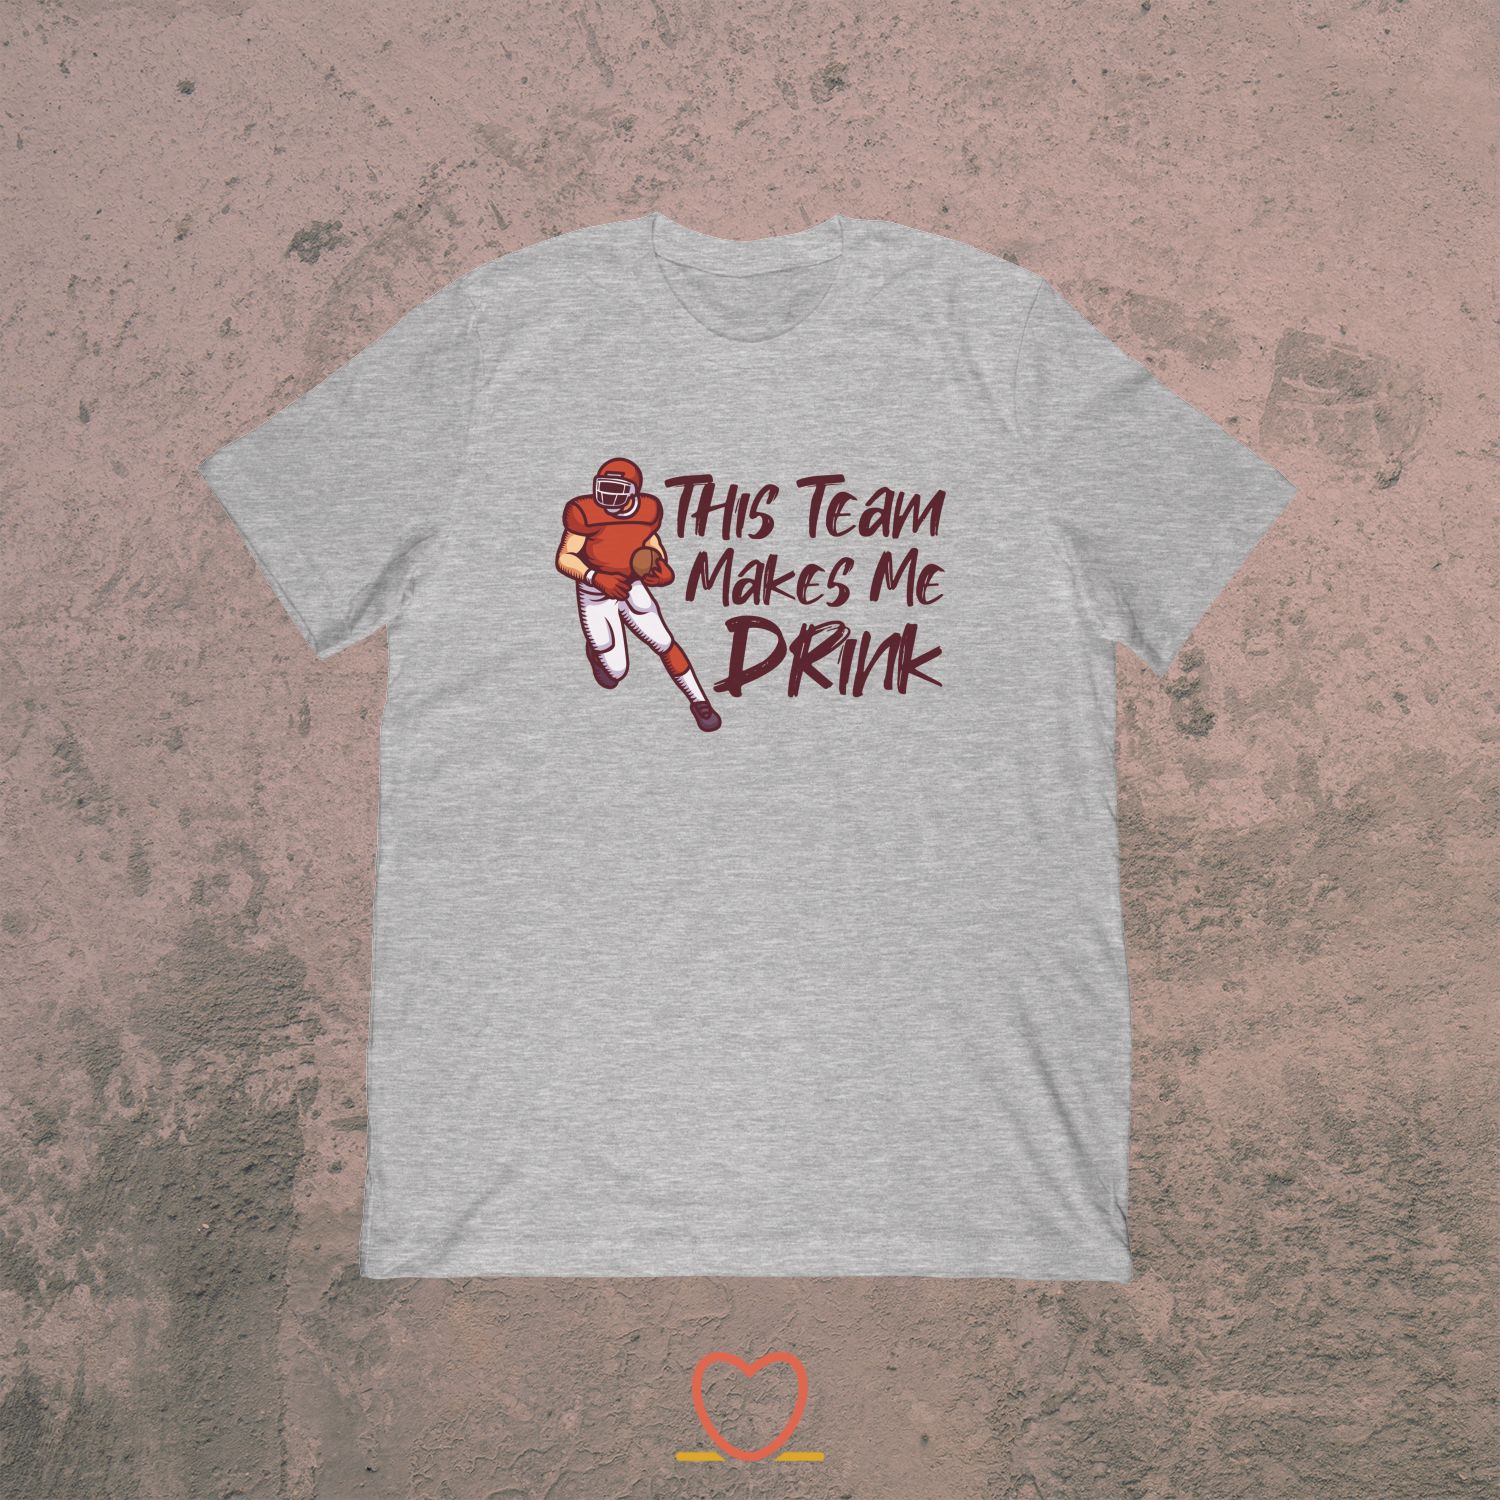 This Team Makes Me Drink – Funny US Football Tee